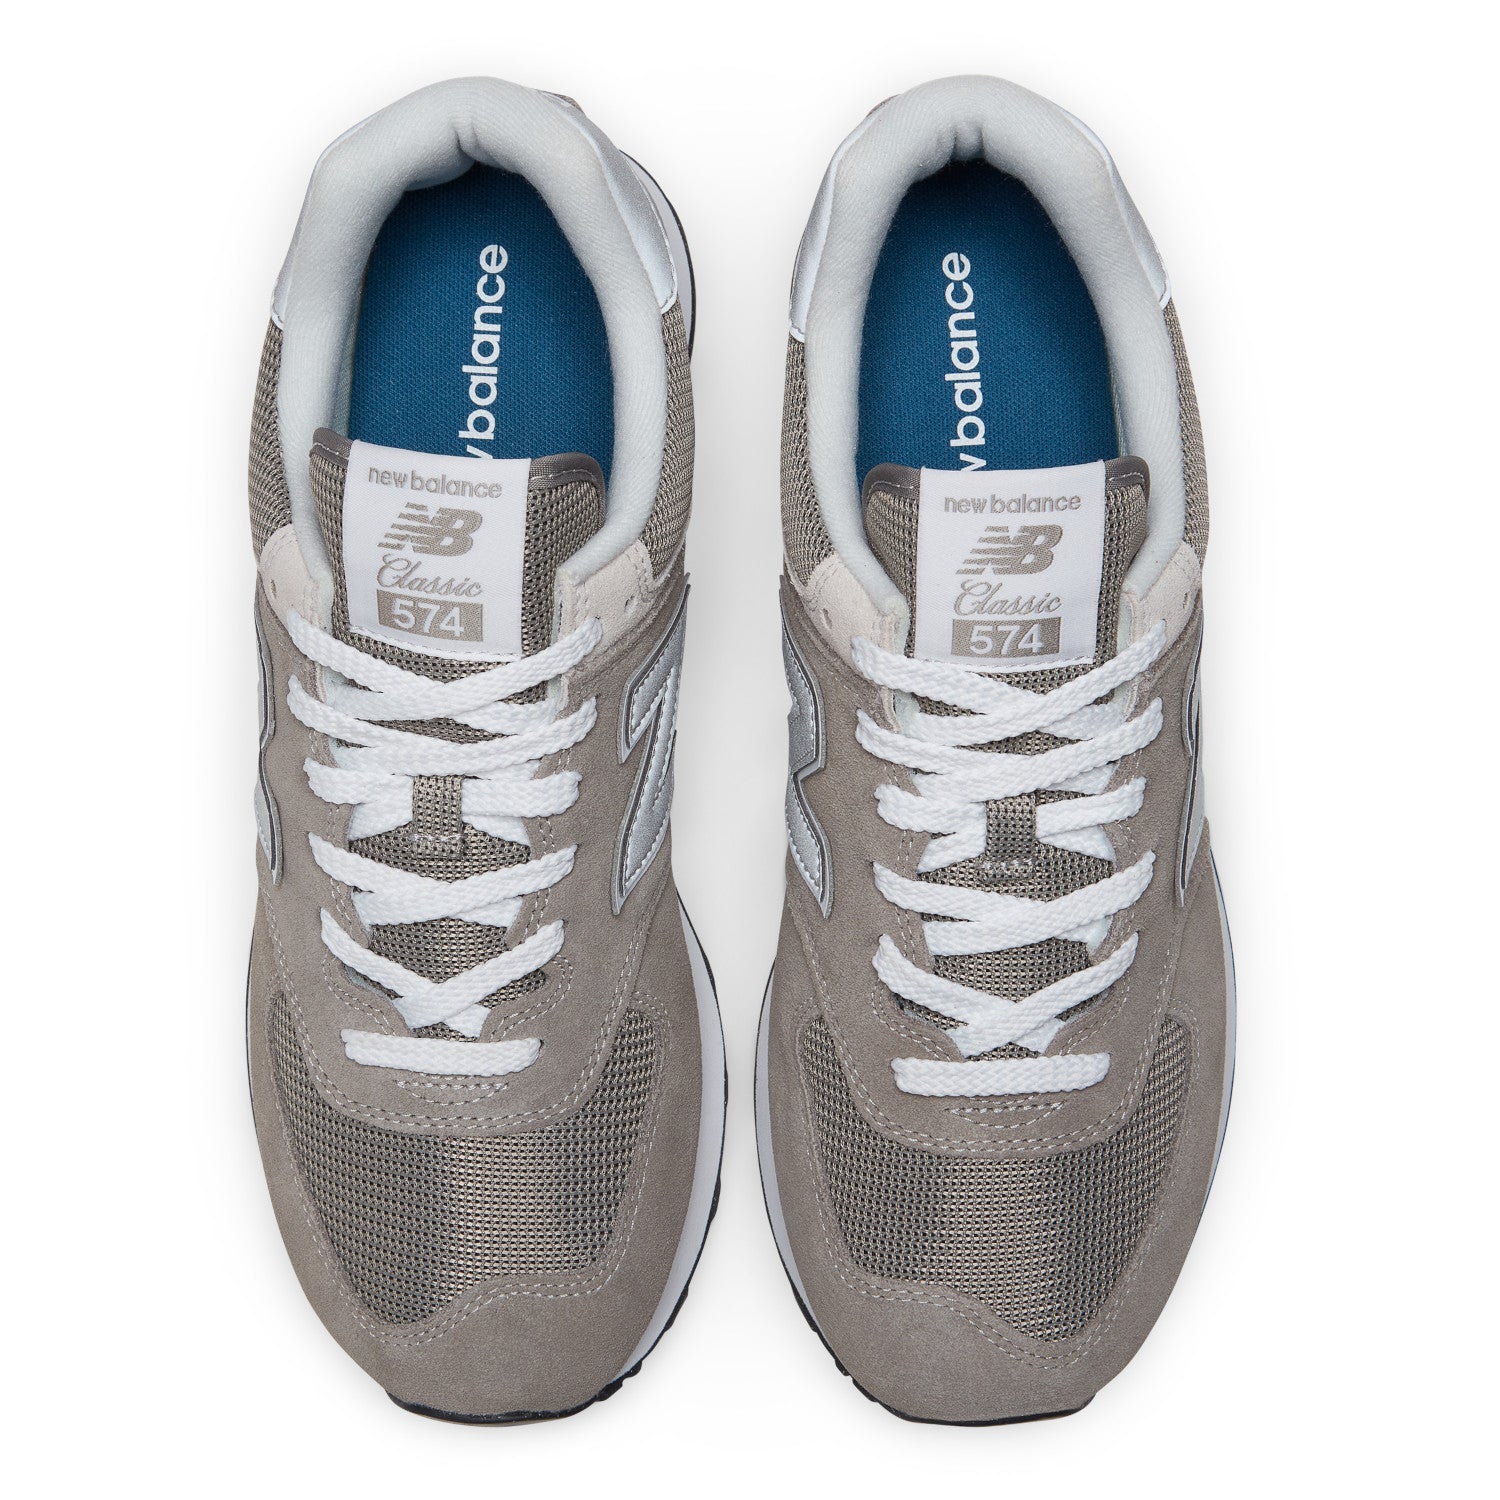 Men's New Balance 574 Core Color: Grey with White